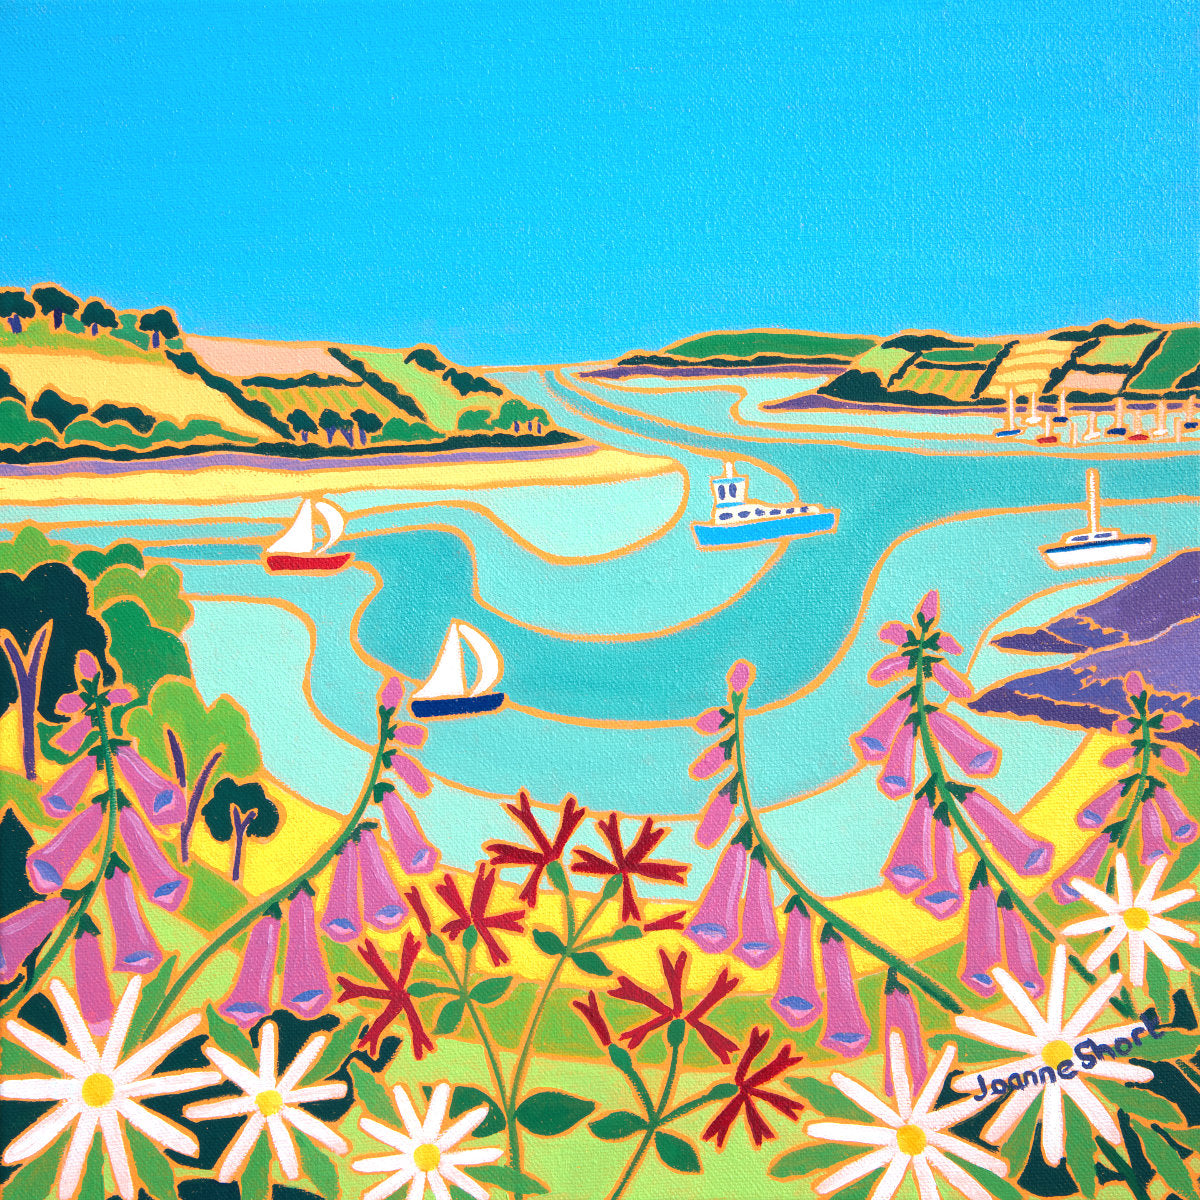 Cornwall Art Gallery Painting by Joanne Short. 'View of the Carrick Roads from Trelissick'. 12 x 12 inches oil on canvas.